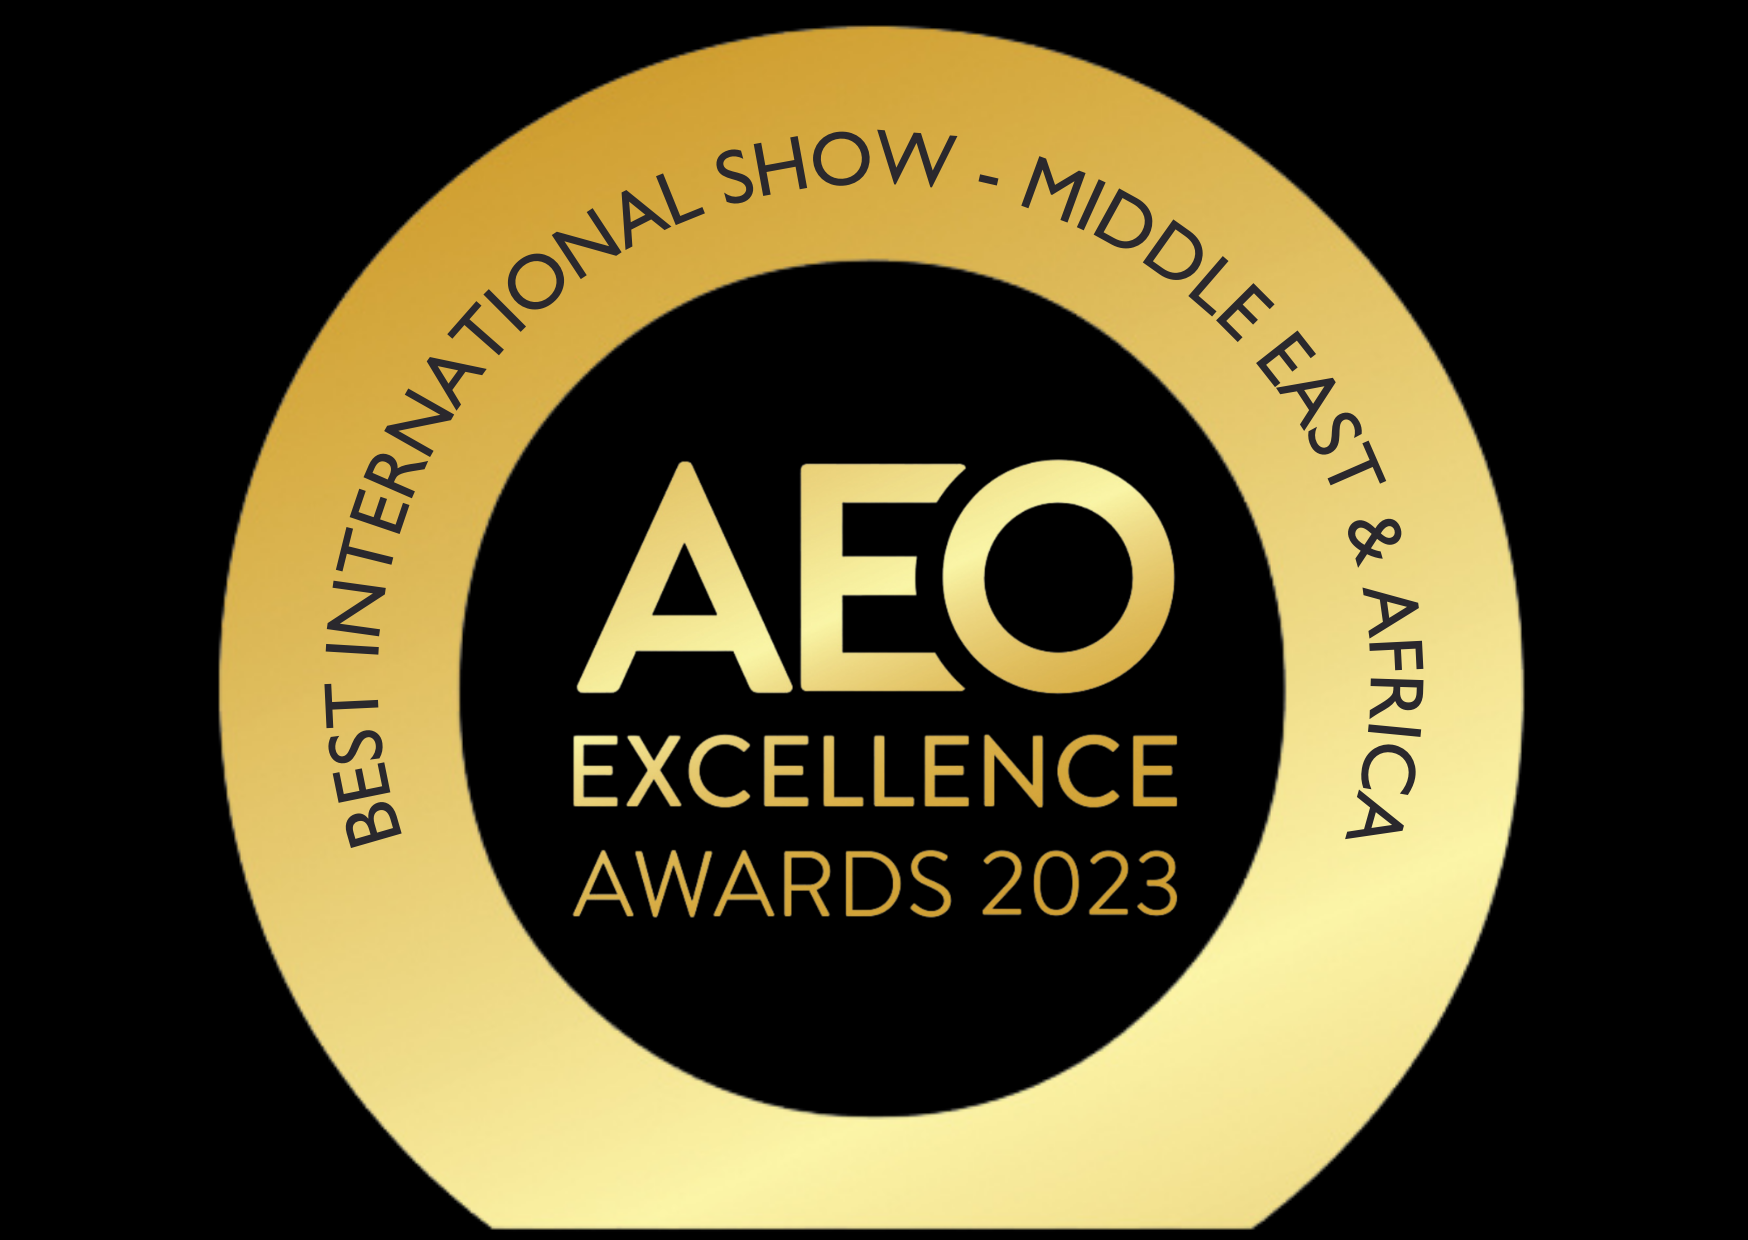 BEST INTERNATIONAL SHOW- MIDDLE EAST & AFRICA